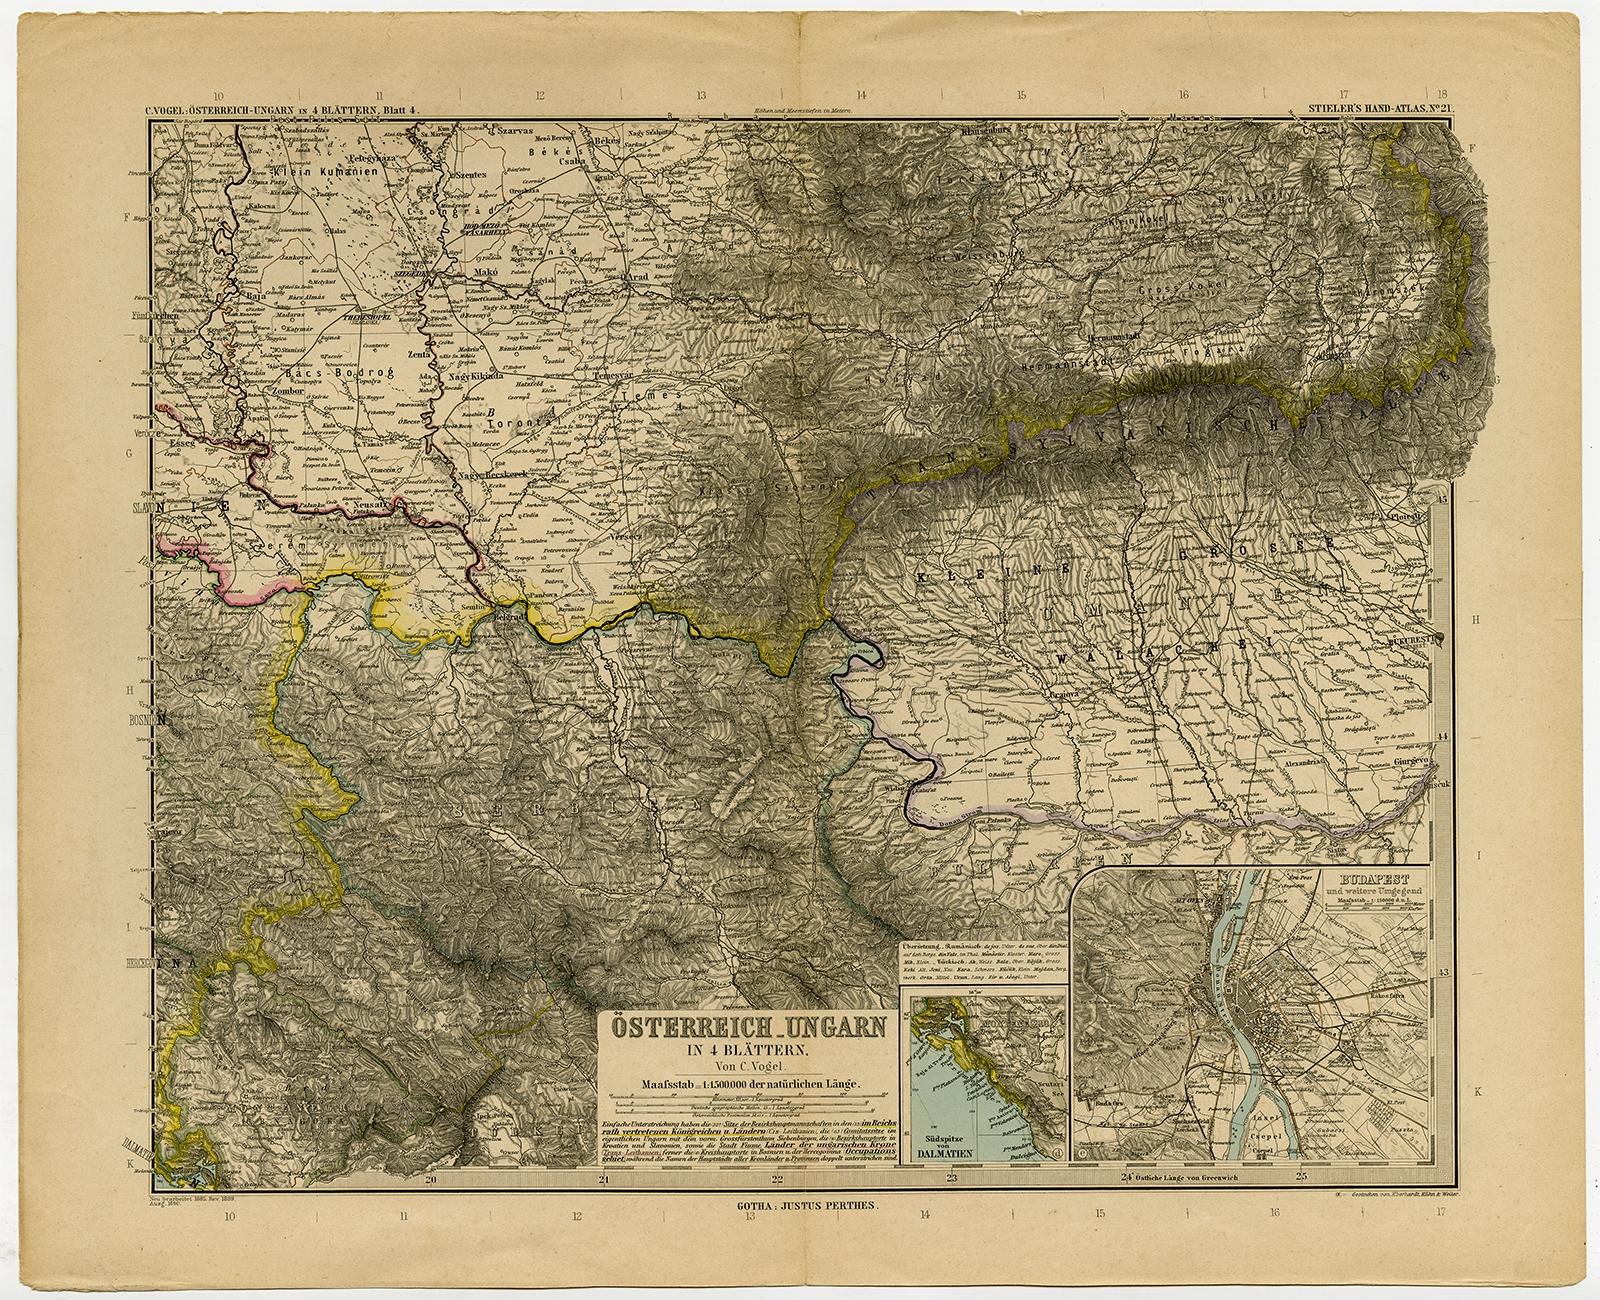 Antique map titled 'Osterreich-Ungarn in 4 Blattern, Blatt 4.' 

Map of Eastern Europe, with Montenegro in the lower left corner, the southern edge of Hungary (area Baja and Szeged) and Serbia and Bulgaria. With a small inset map of Budapest and